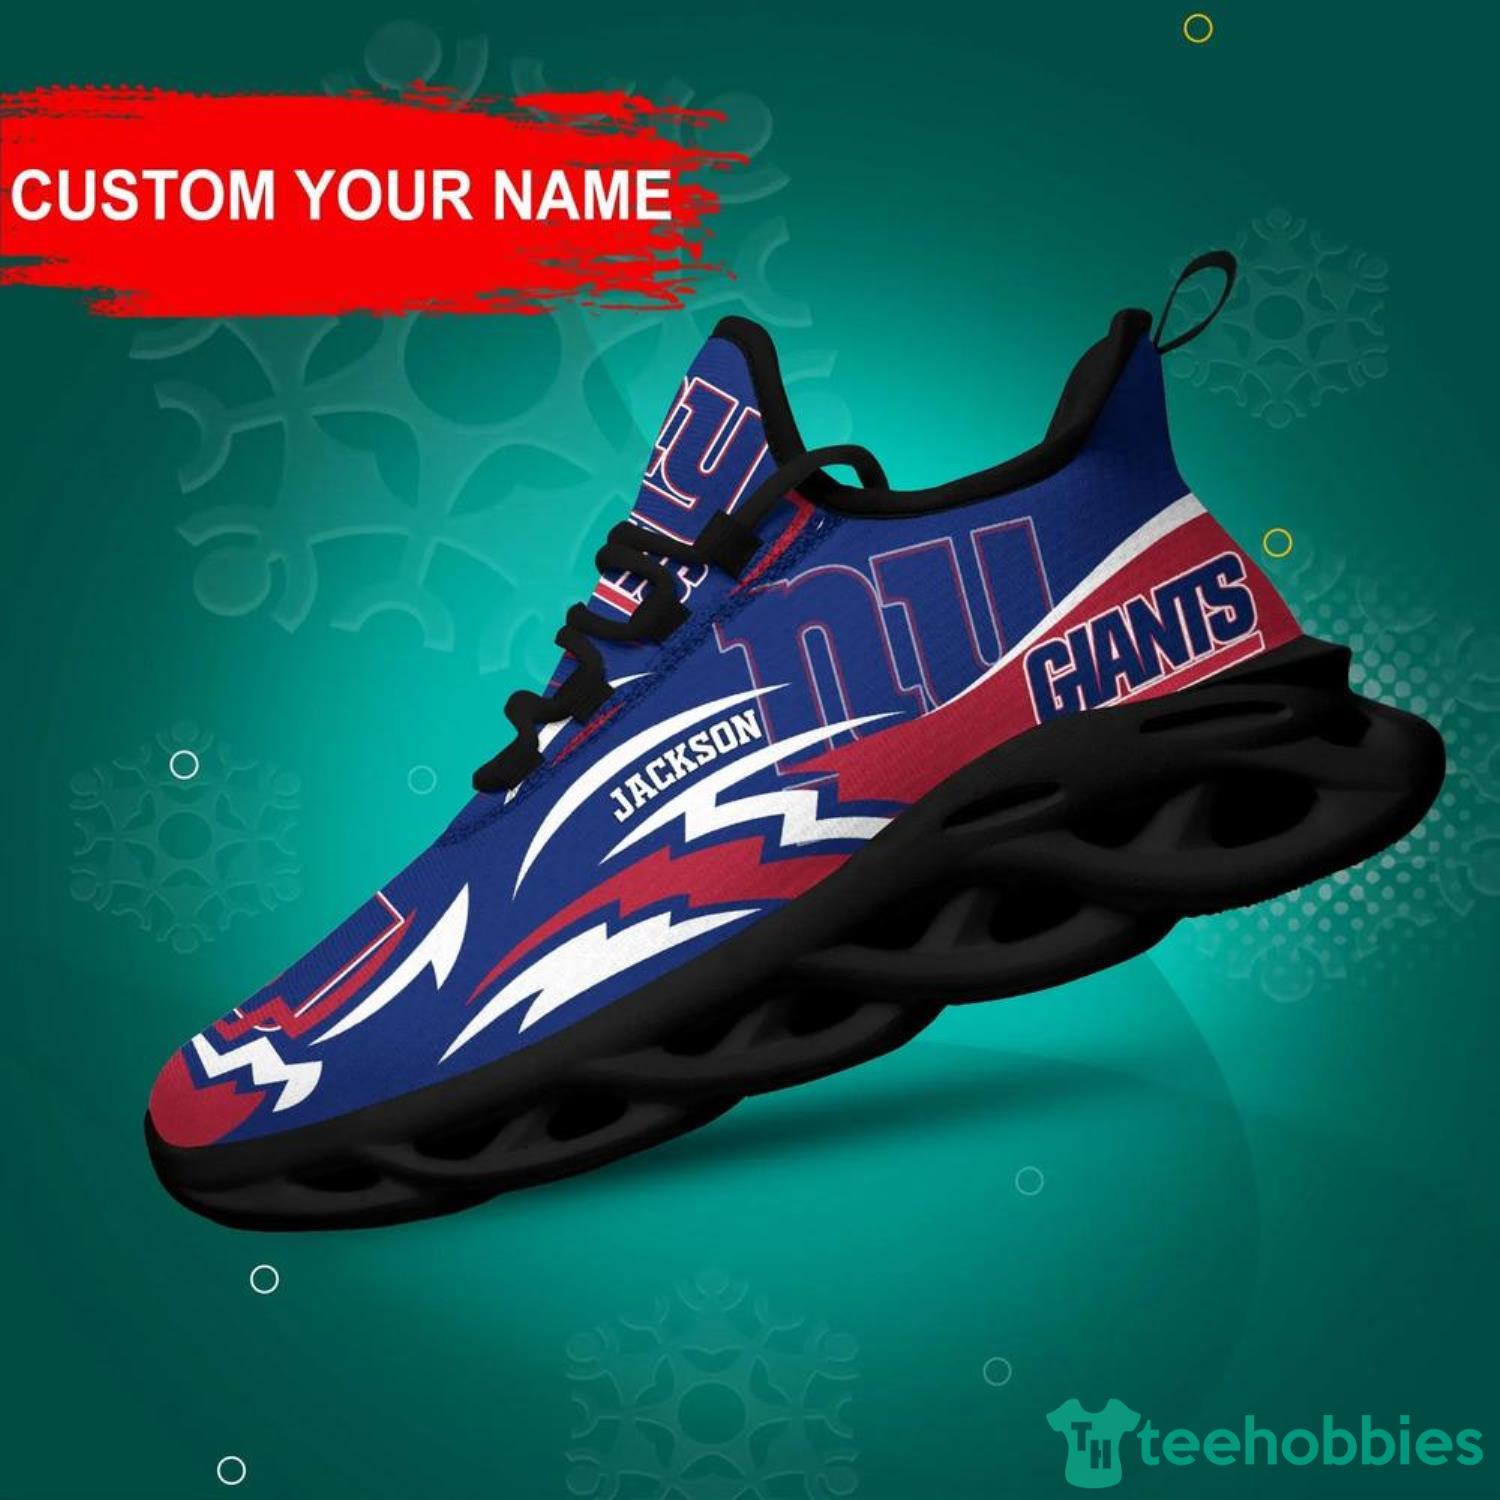 New York Giants NFL Max Soul Shoes Custom Name Sneakers For Fans - New York Giants NFL Max Soul Shoes Custom Name, Sneakers Hot Trending Personalized Gifts For NFL Fans_1